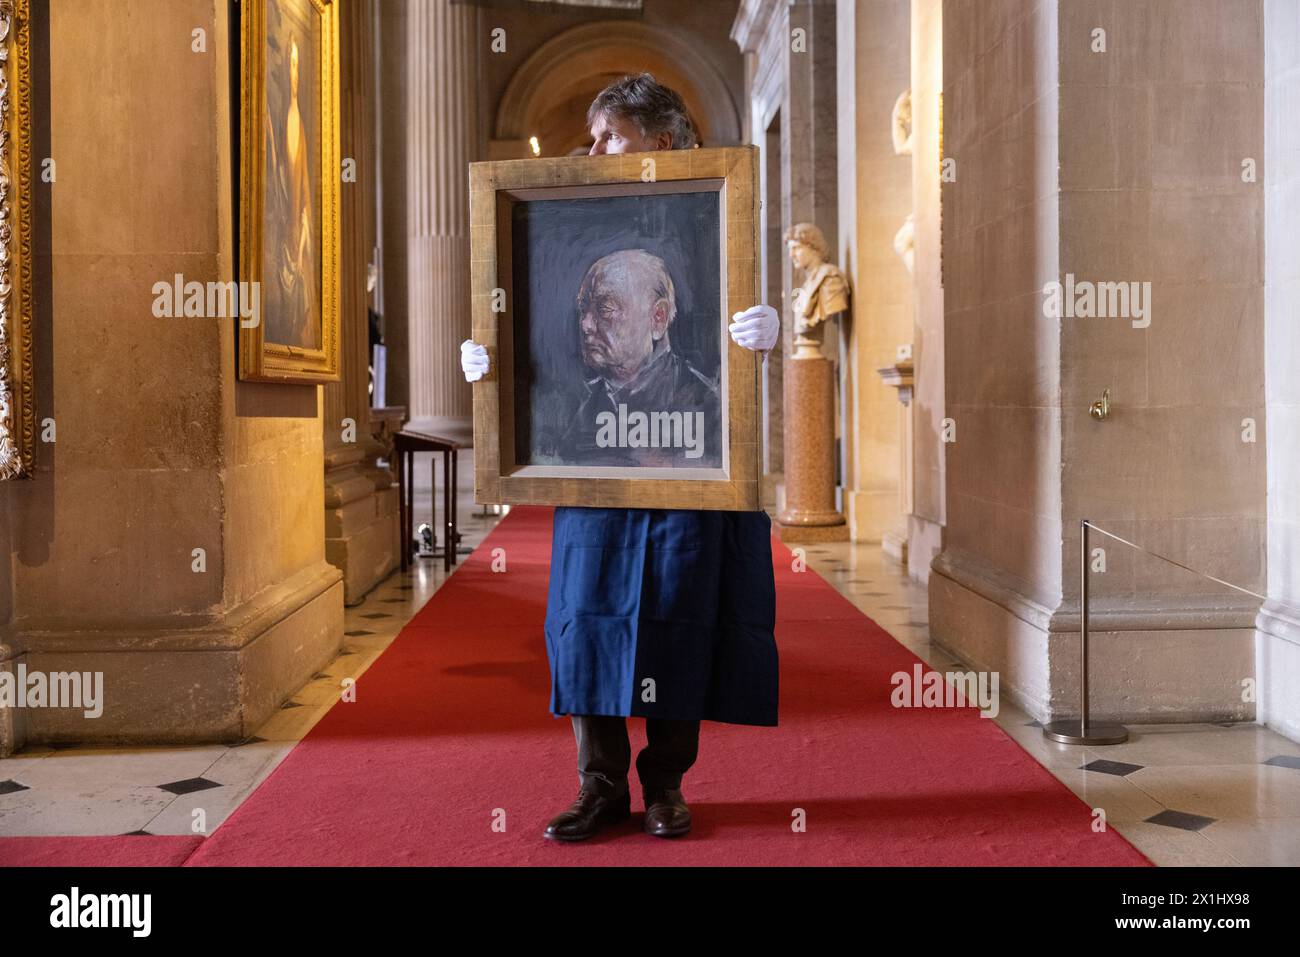 Sotheby's staff holds a portrait of the former British prime minister Winston Churchill, painted by Graham Sutherland in 1954, Blenheim Palace, UK Stock Photo